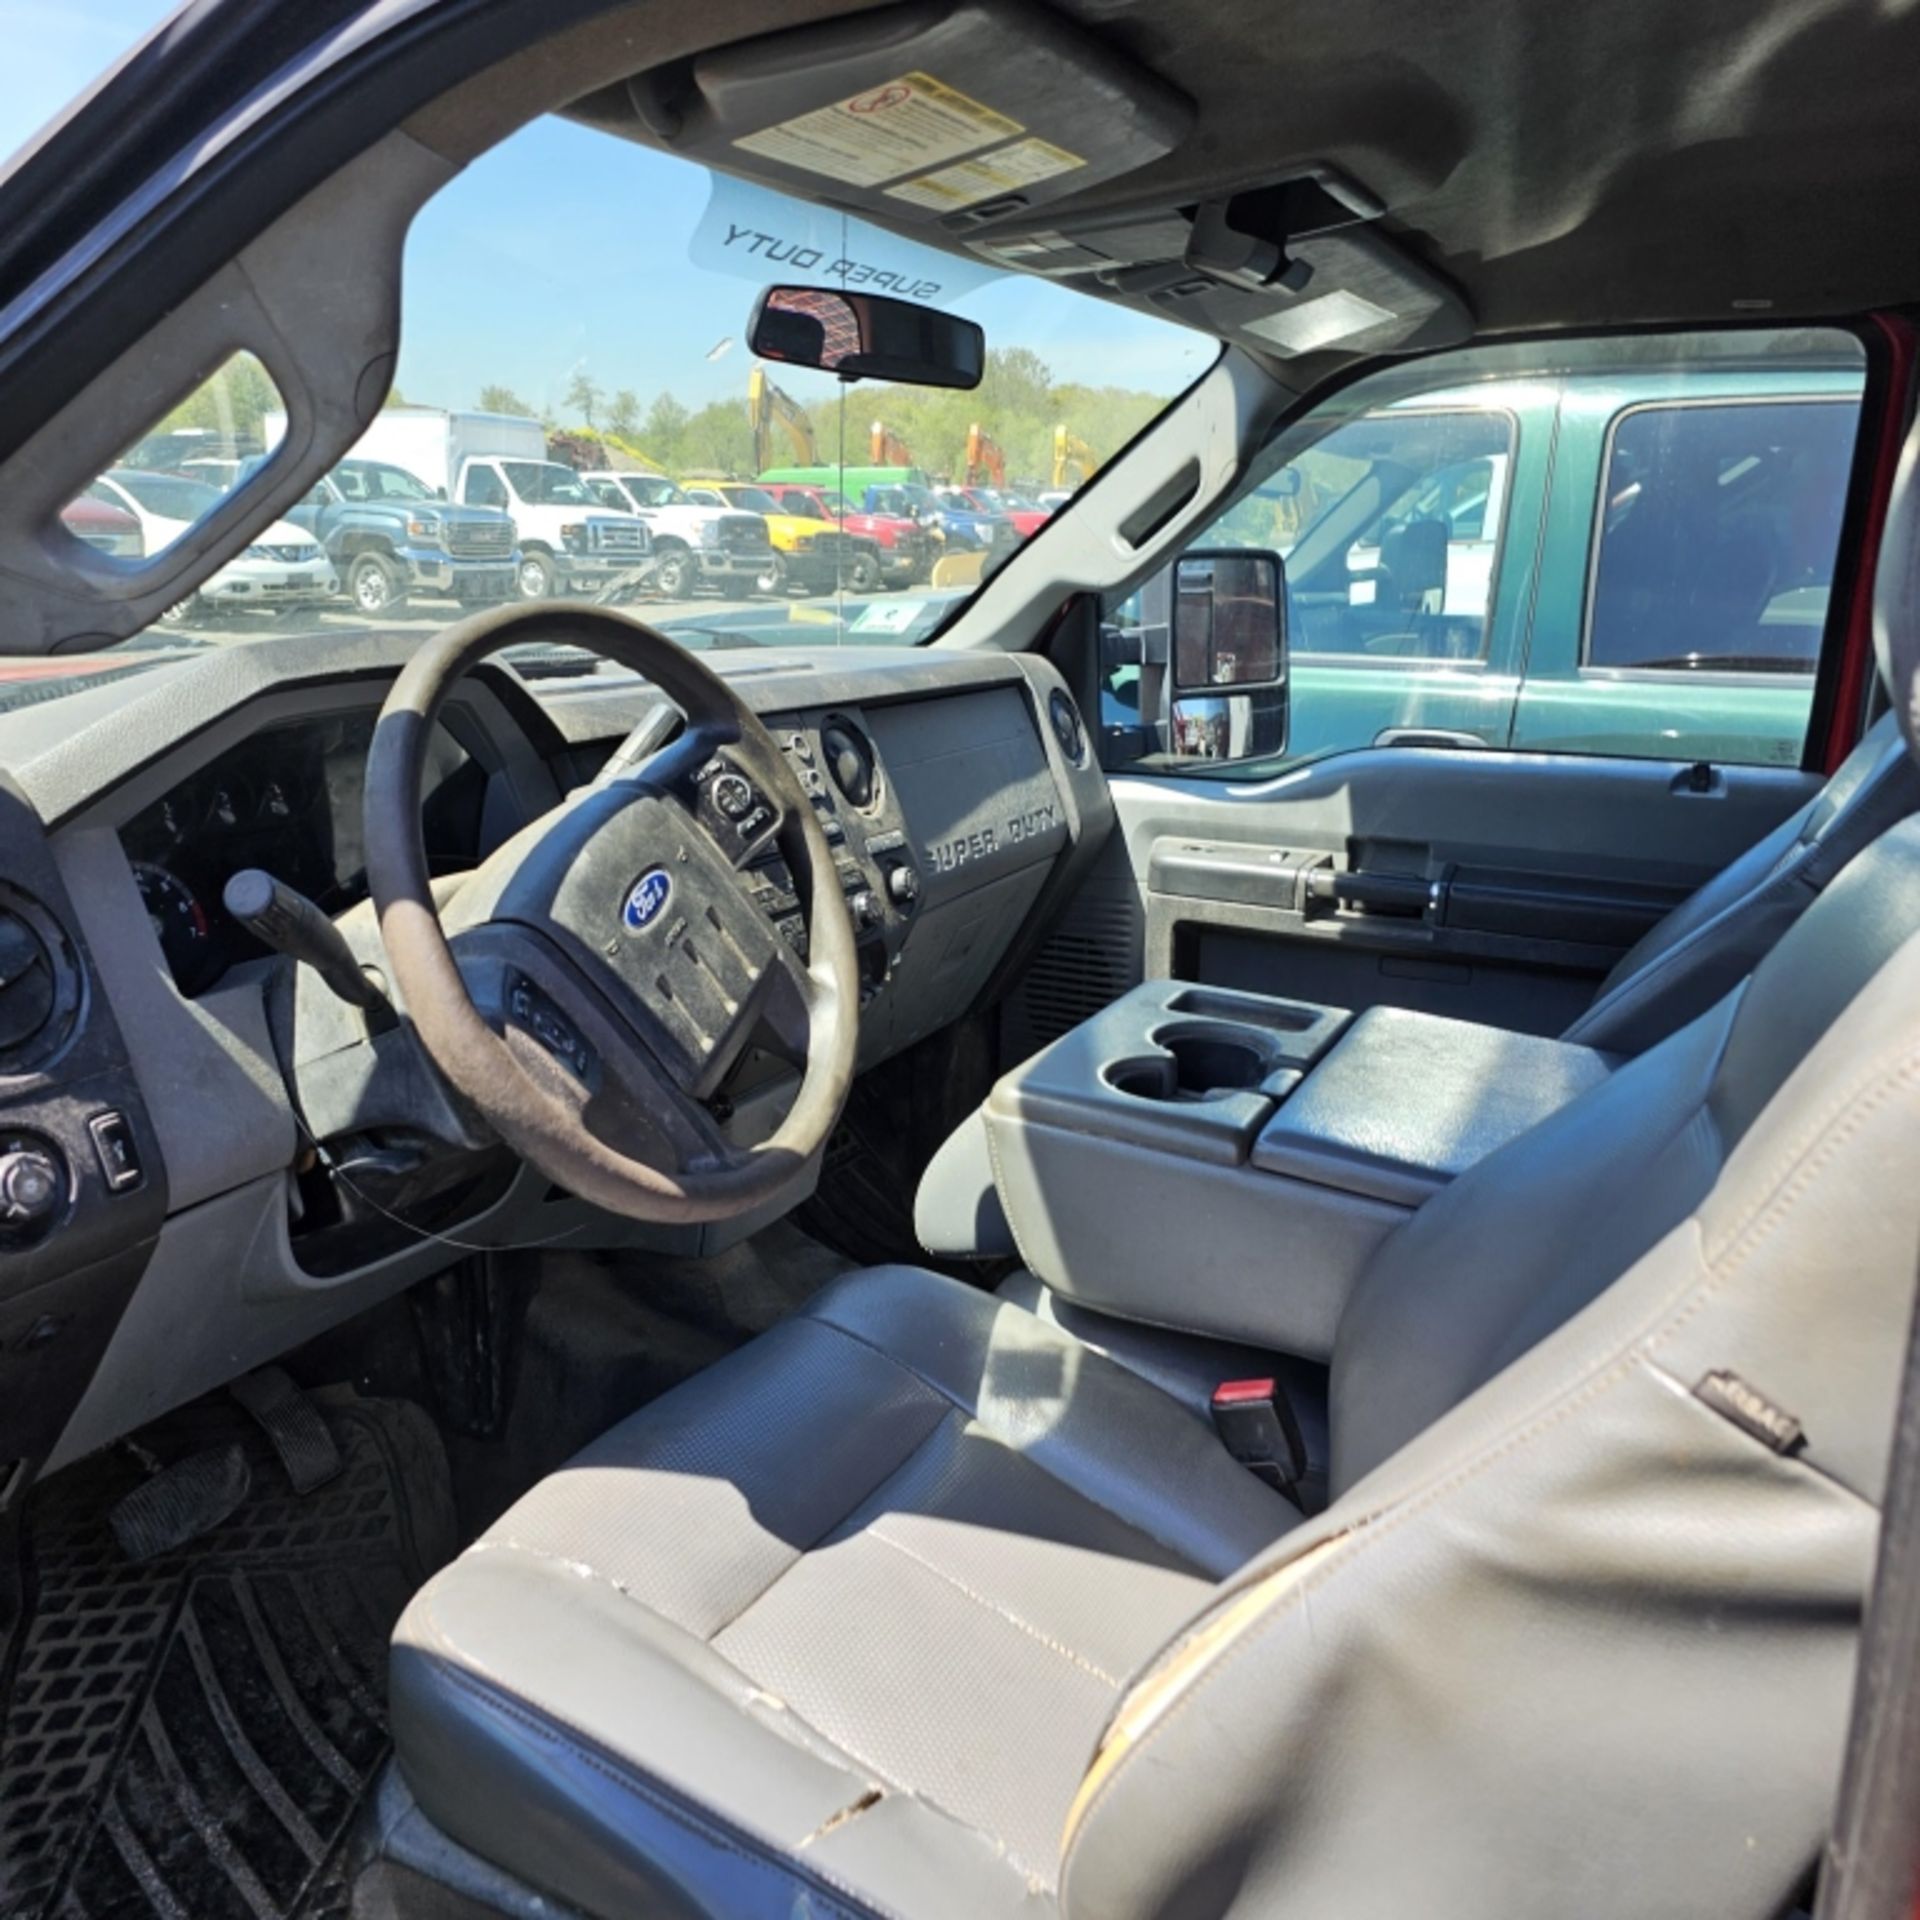 2013 Ford F350 Pickup - Image 6 of 9